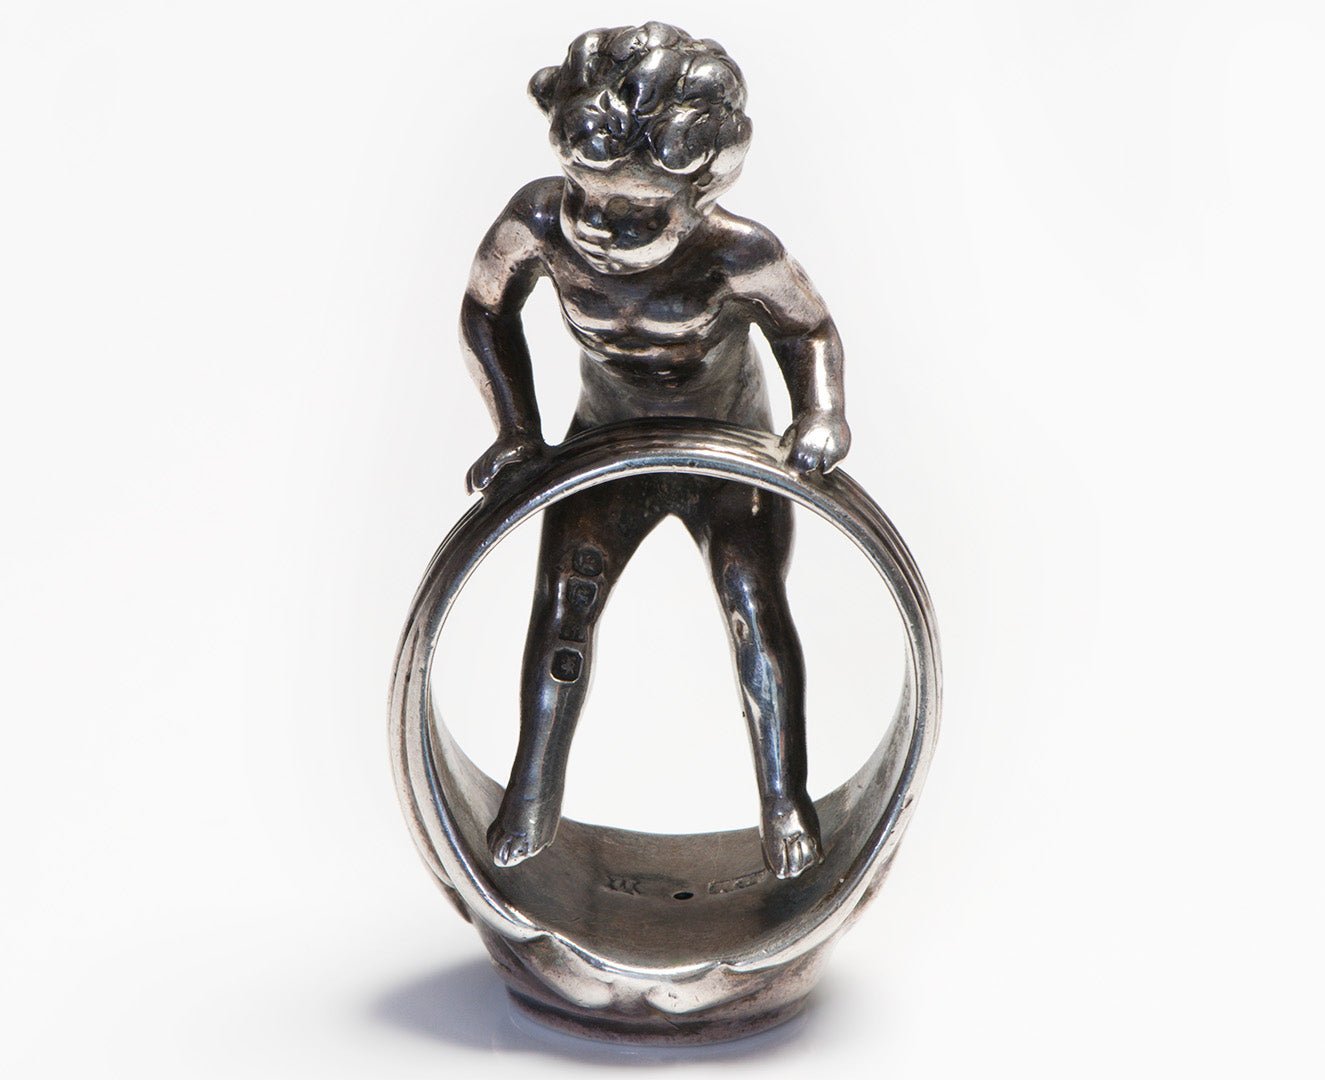 Antique Silver Figural Cherub and Signet Ring Seal - DSF Antique Jewelry